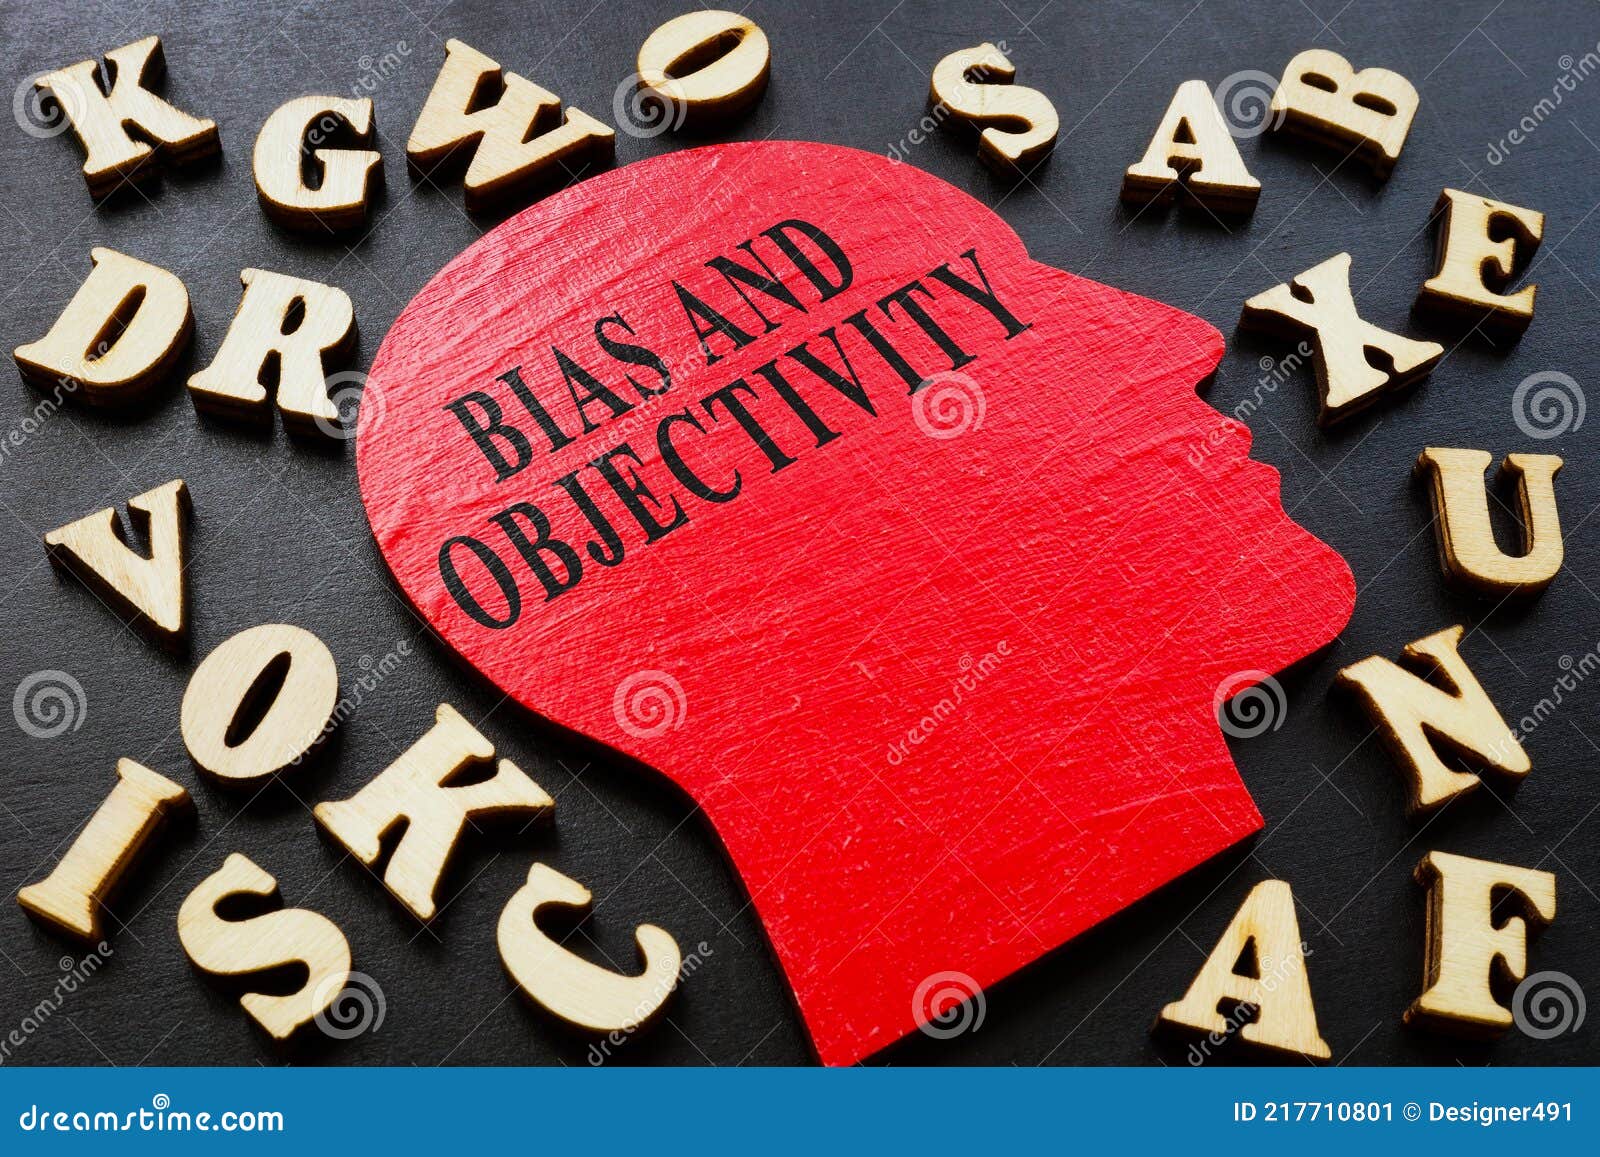 words bias and objectivity on the head  and letters.